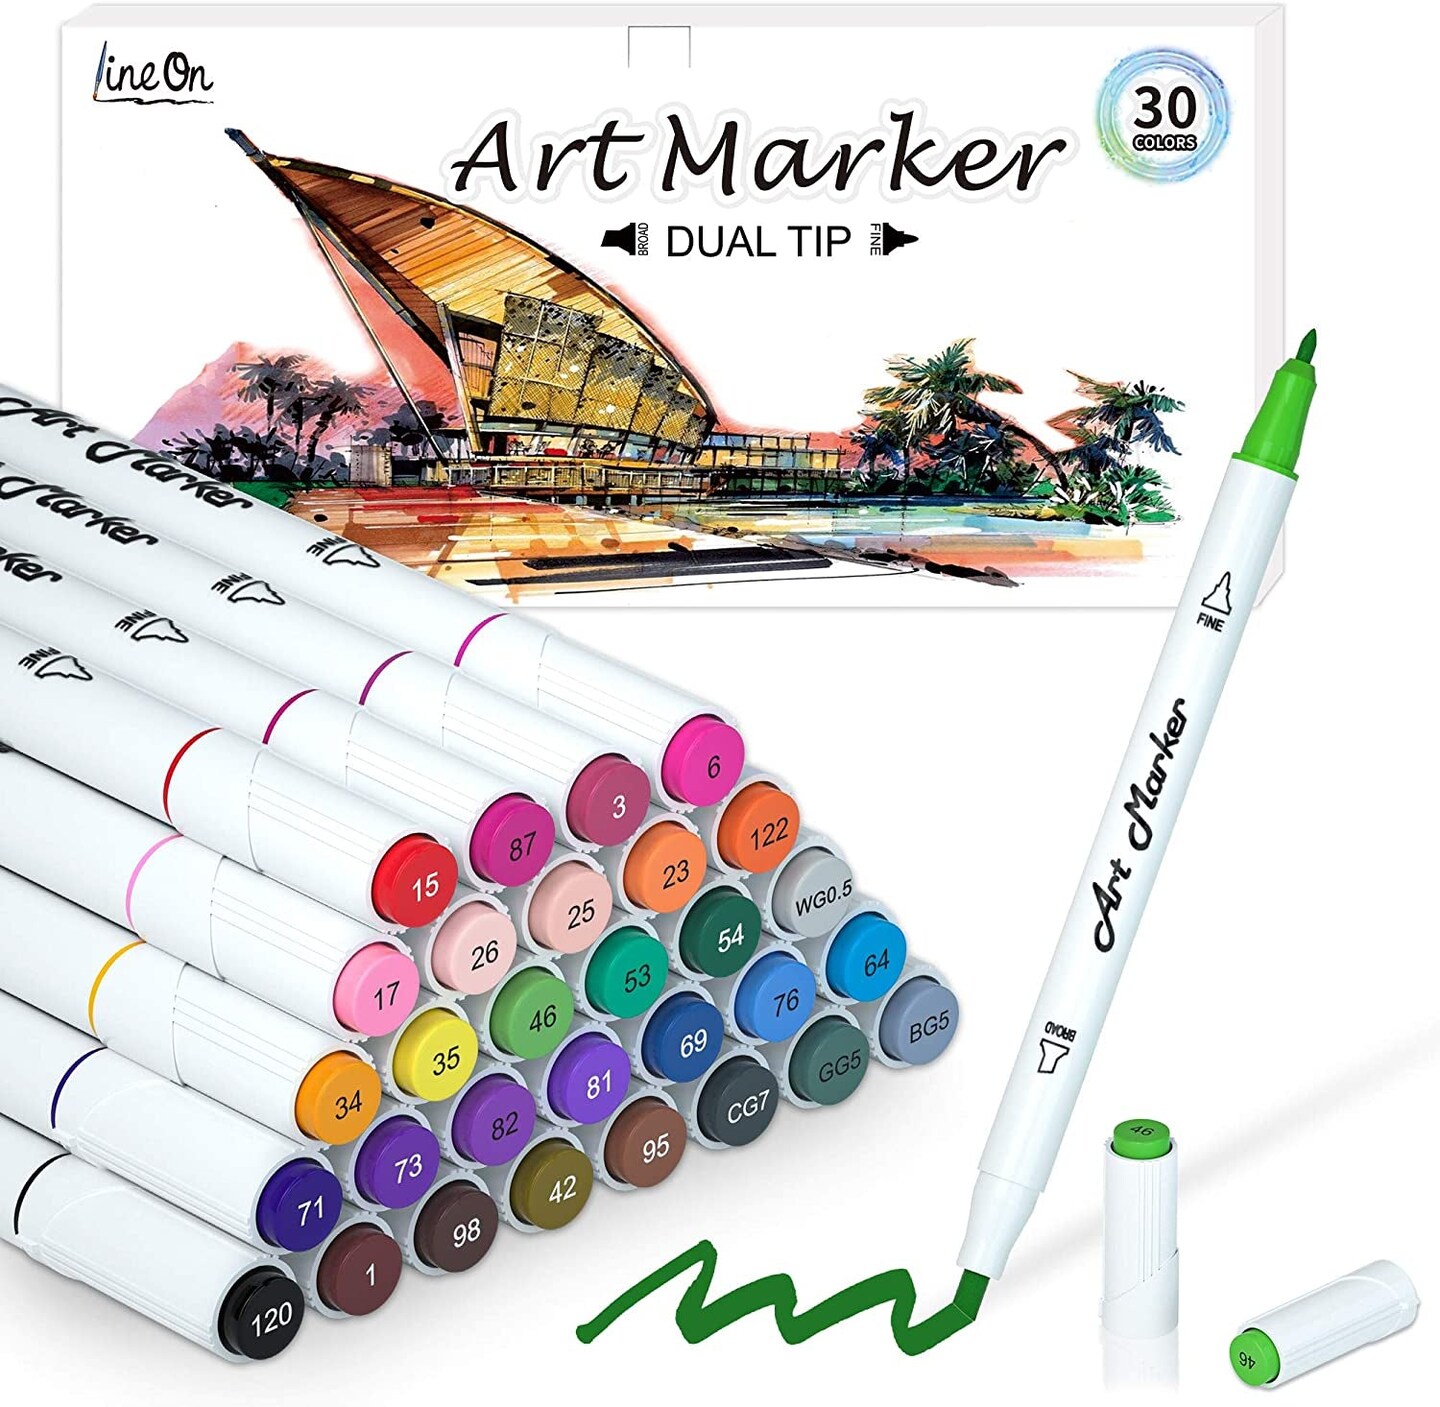 35 Dual Markers Pen for Adult Coloring Book, Coloring Brush Art